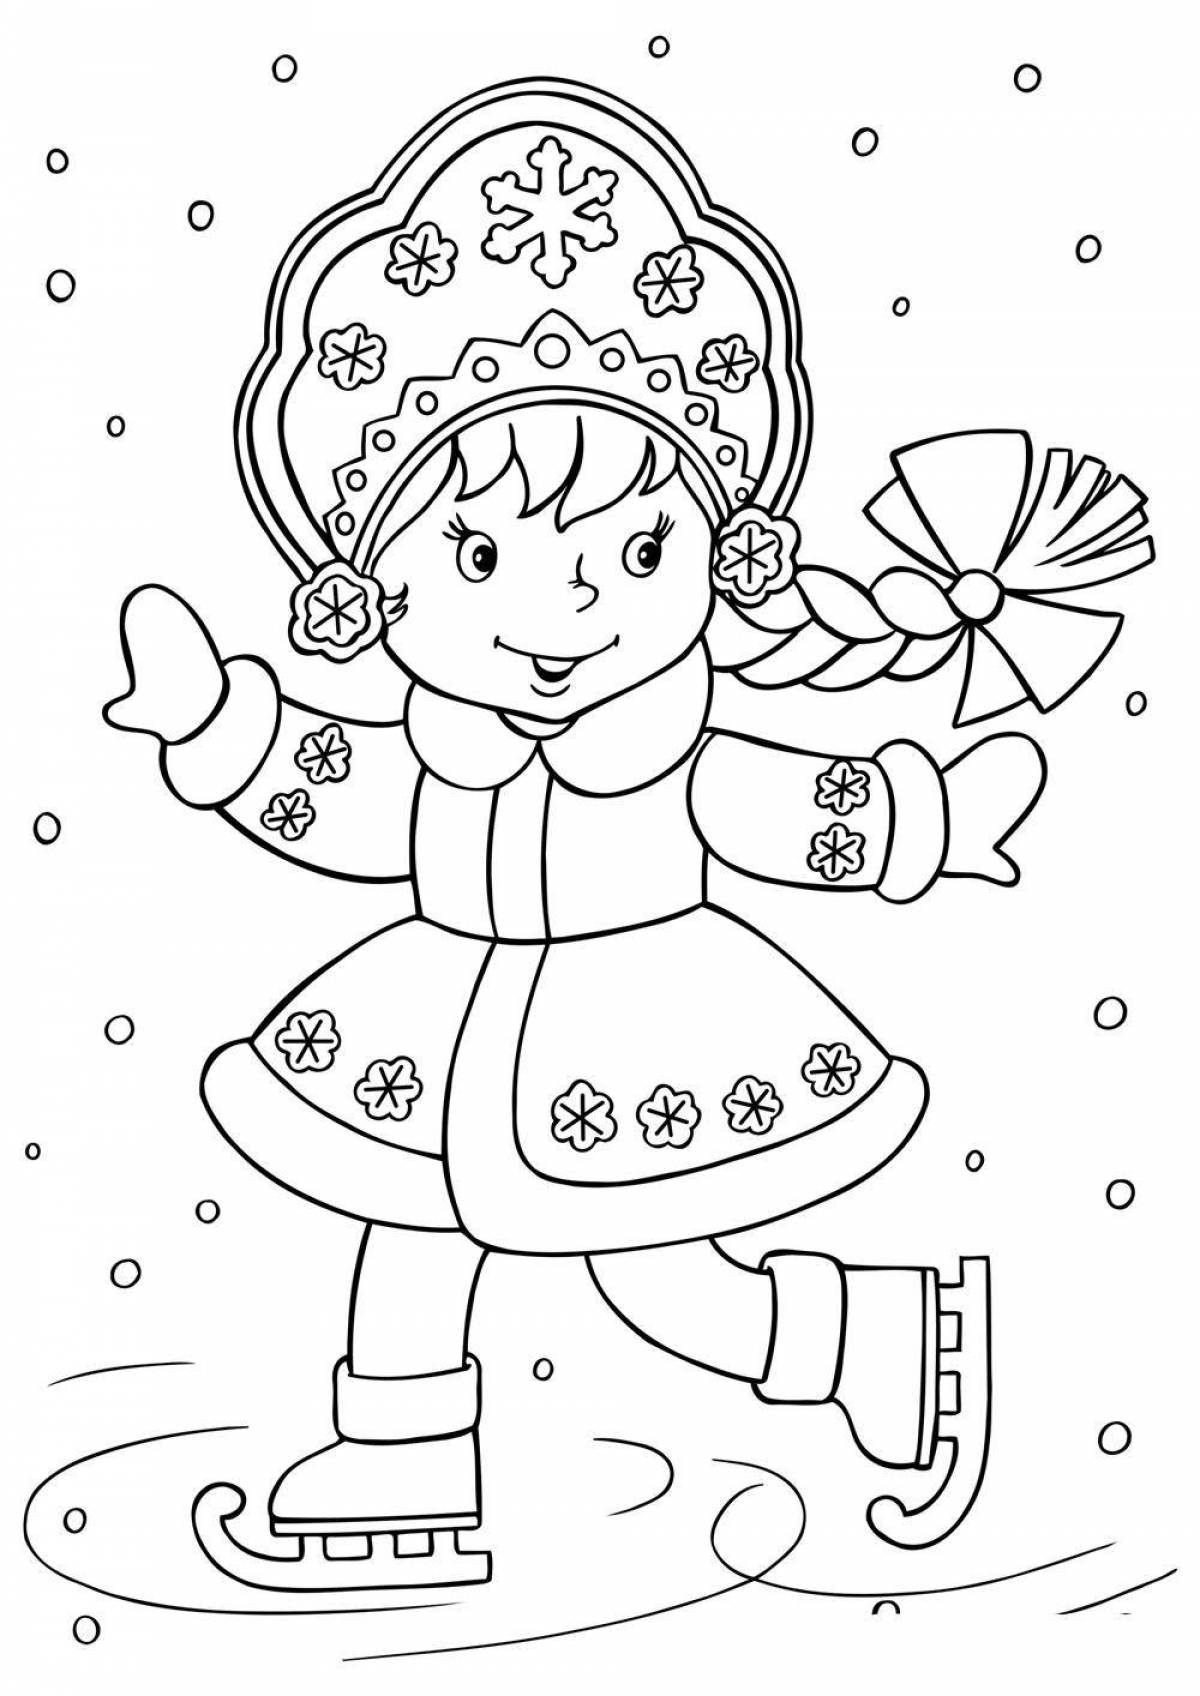 Colorful Christmas coloring book for children 6 years old